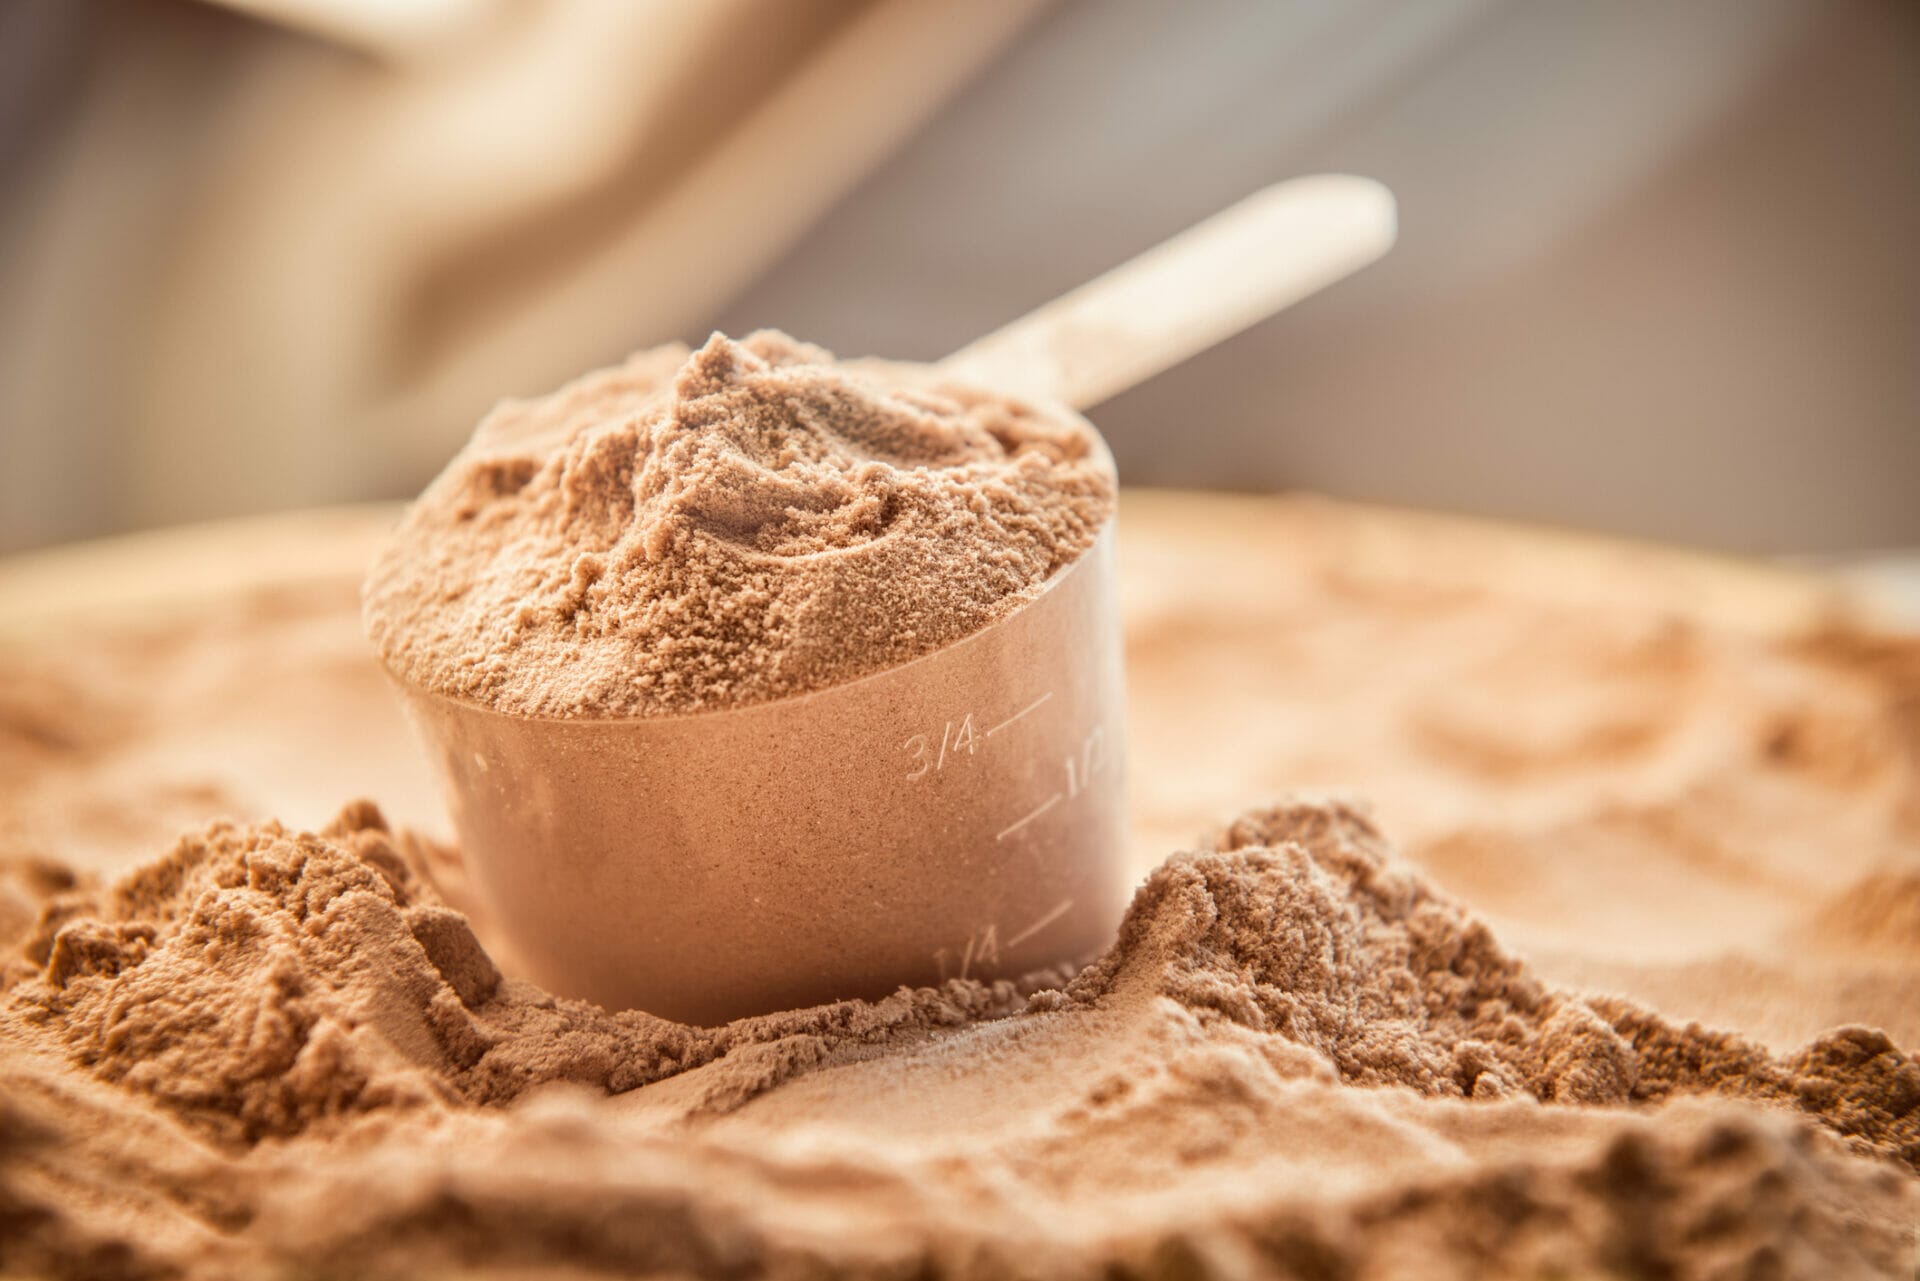 Creatine Supplement Vs Whey Protein: Which is Better for Your Goals?